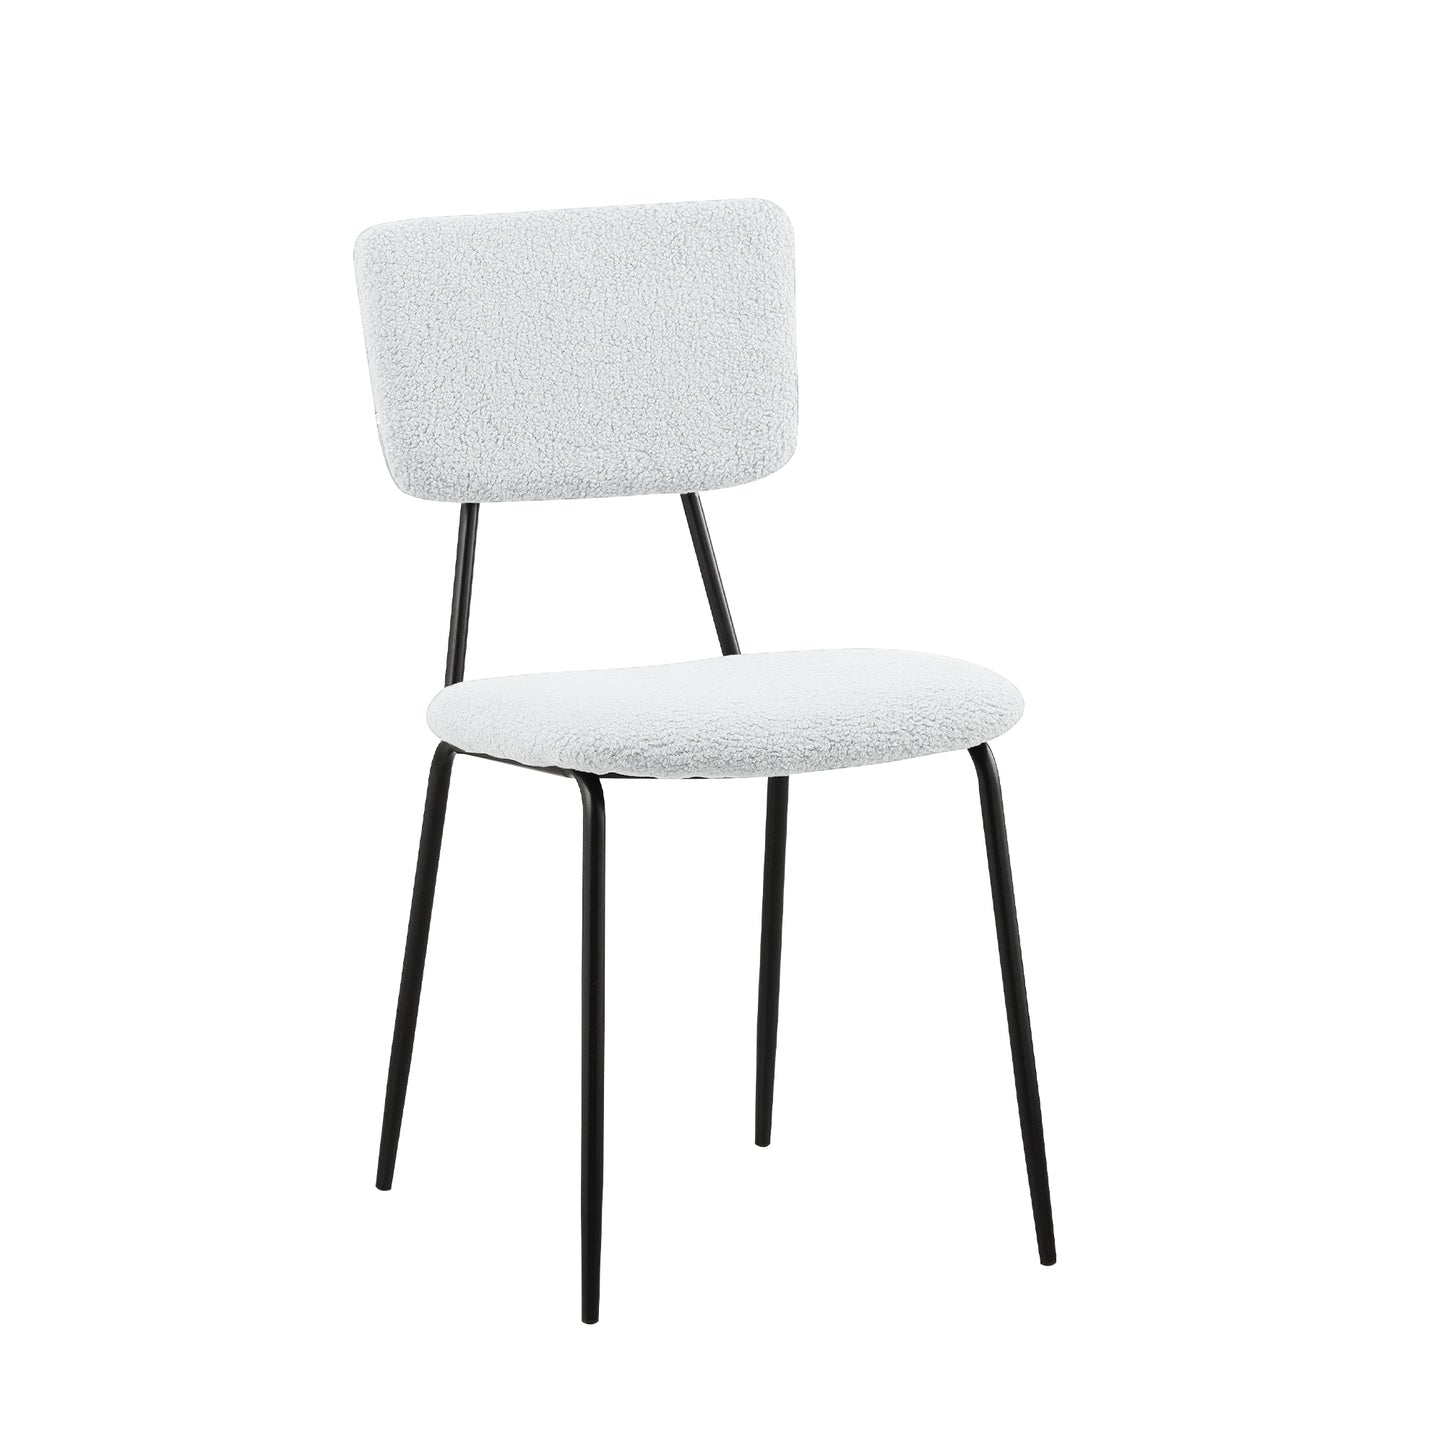 SogesPower Dining Chairs Set of 2, Modern Chairs with Faux Plush Upholstered Back and Chrome Legs, (2 White Chairs)